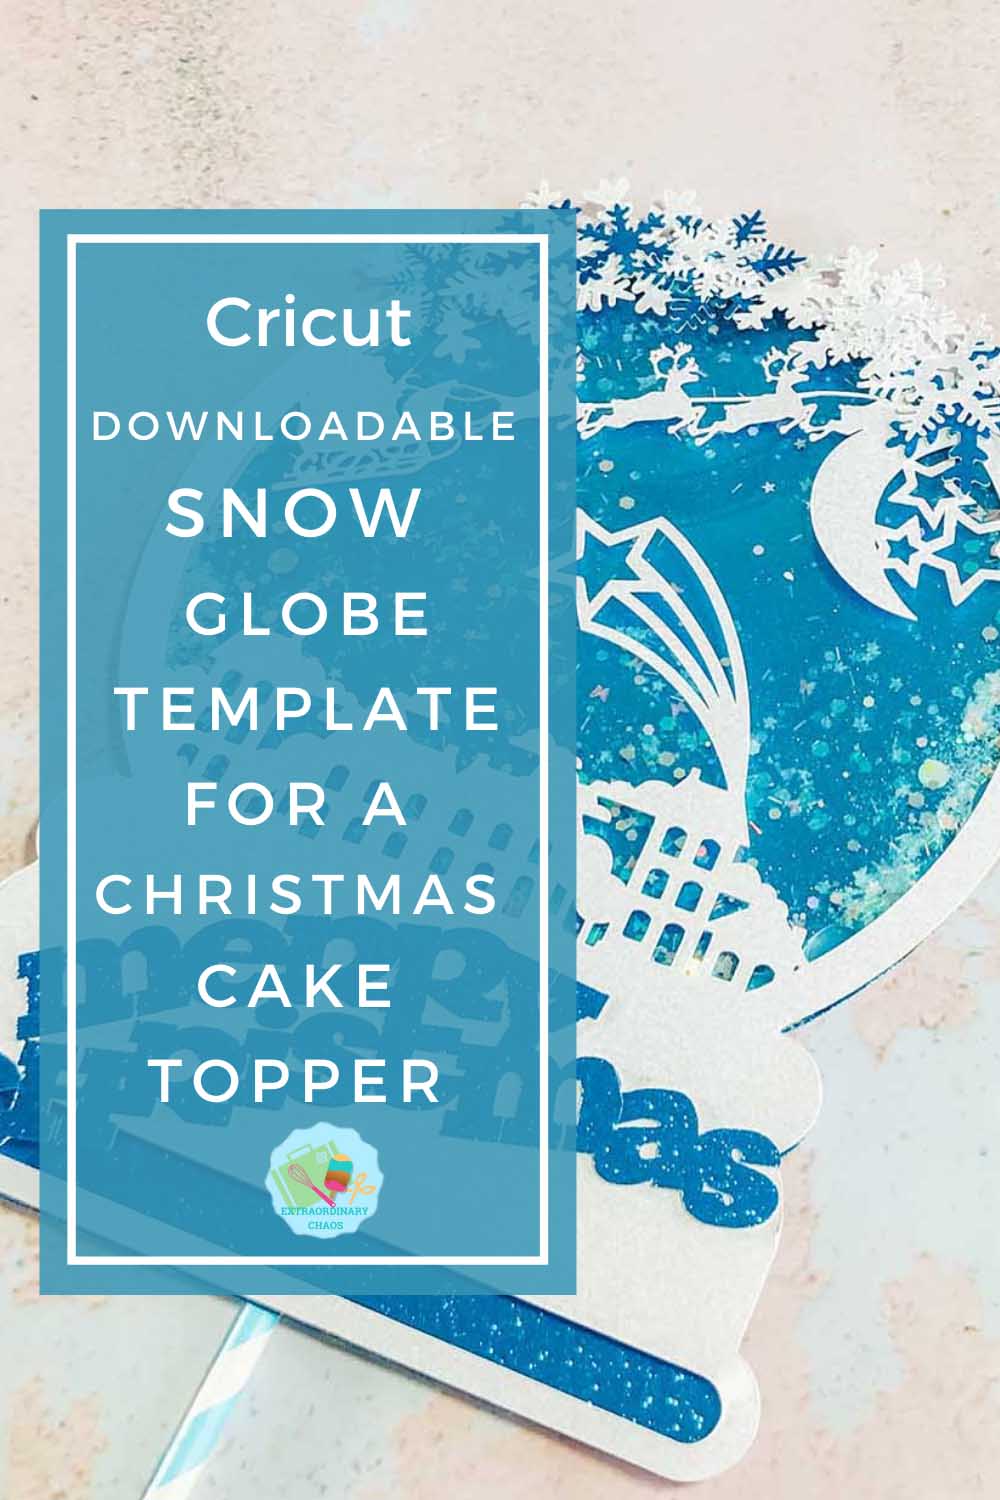 Downloadable Cricut Snow Globe Template for a Christmas Cake Topper